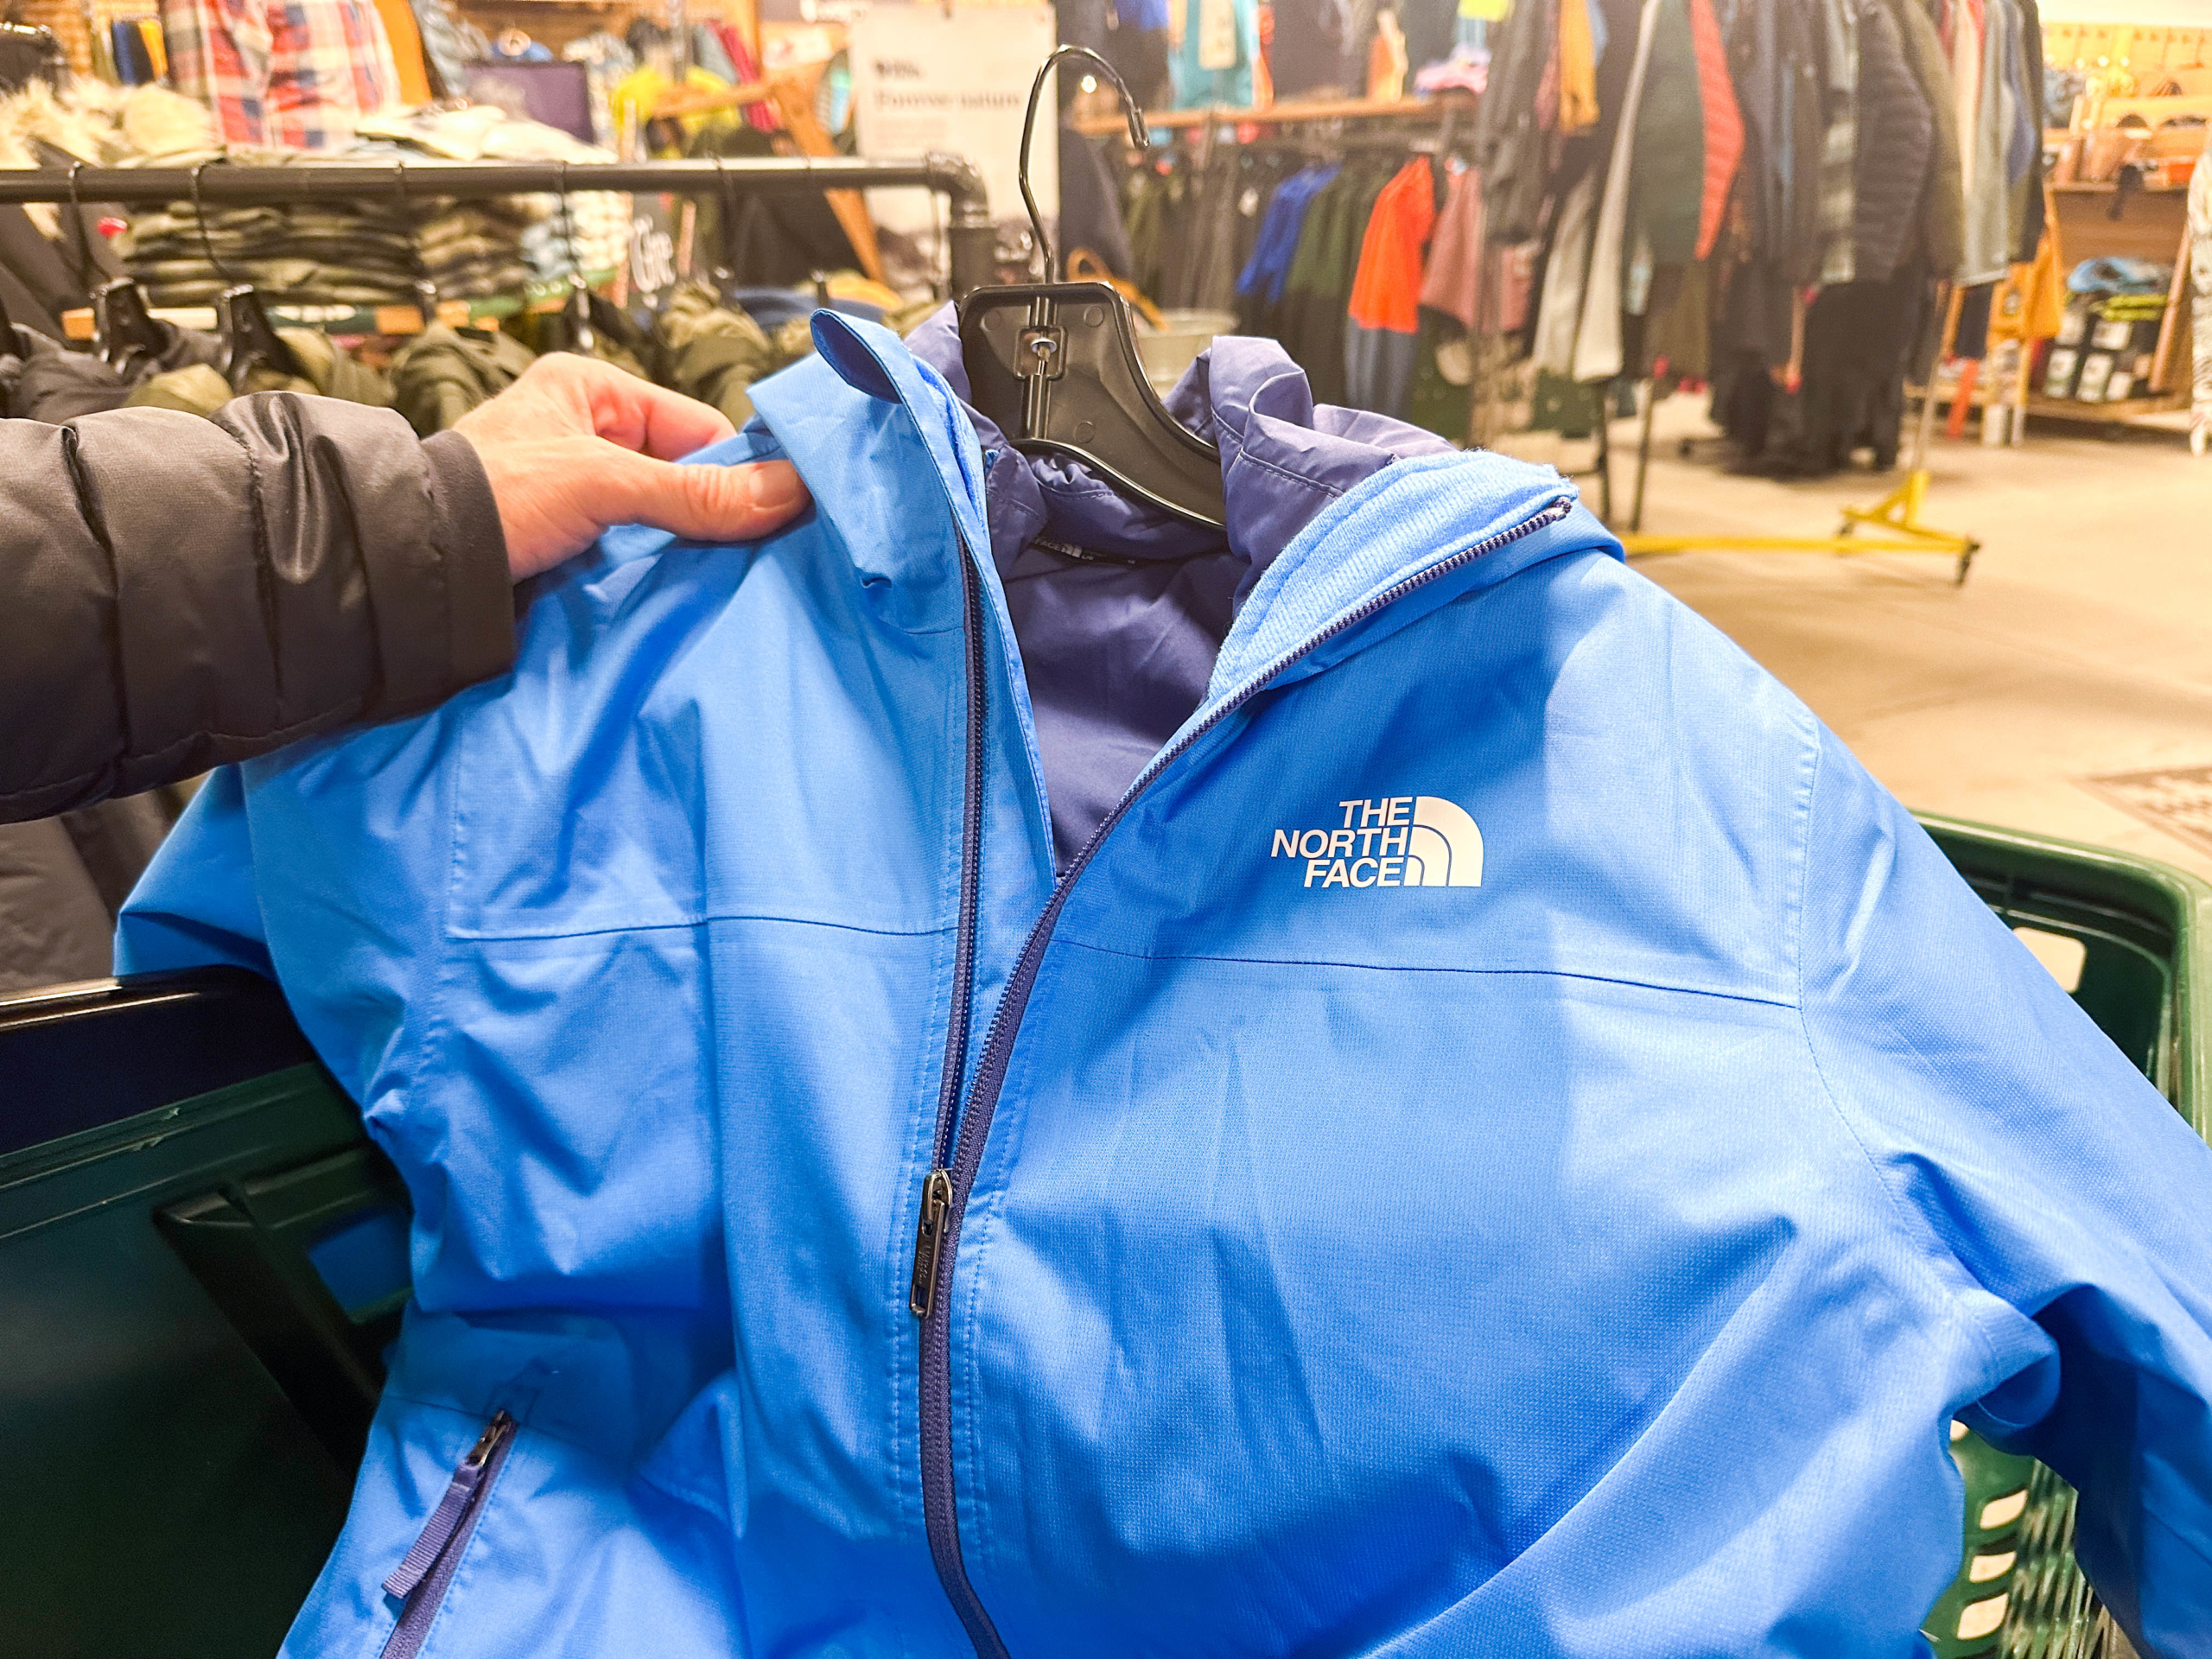 The North Face Rain Coats Blue Coats, Jackets & Vests for Men for Sale, Shop New & Used